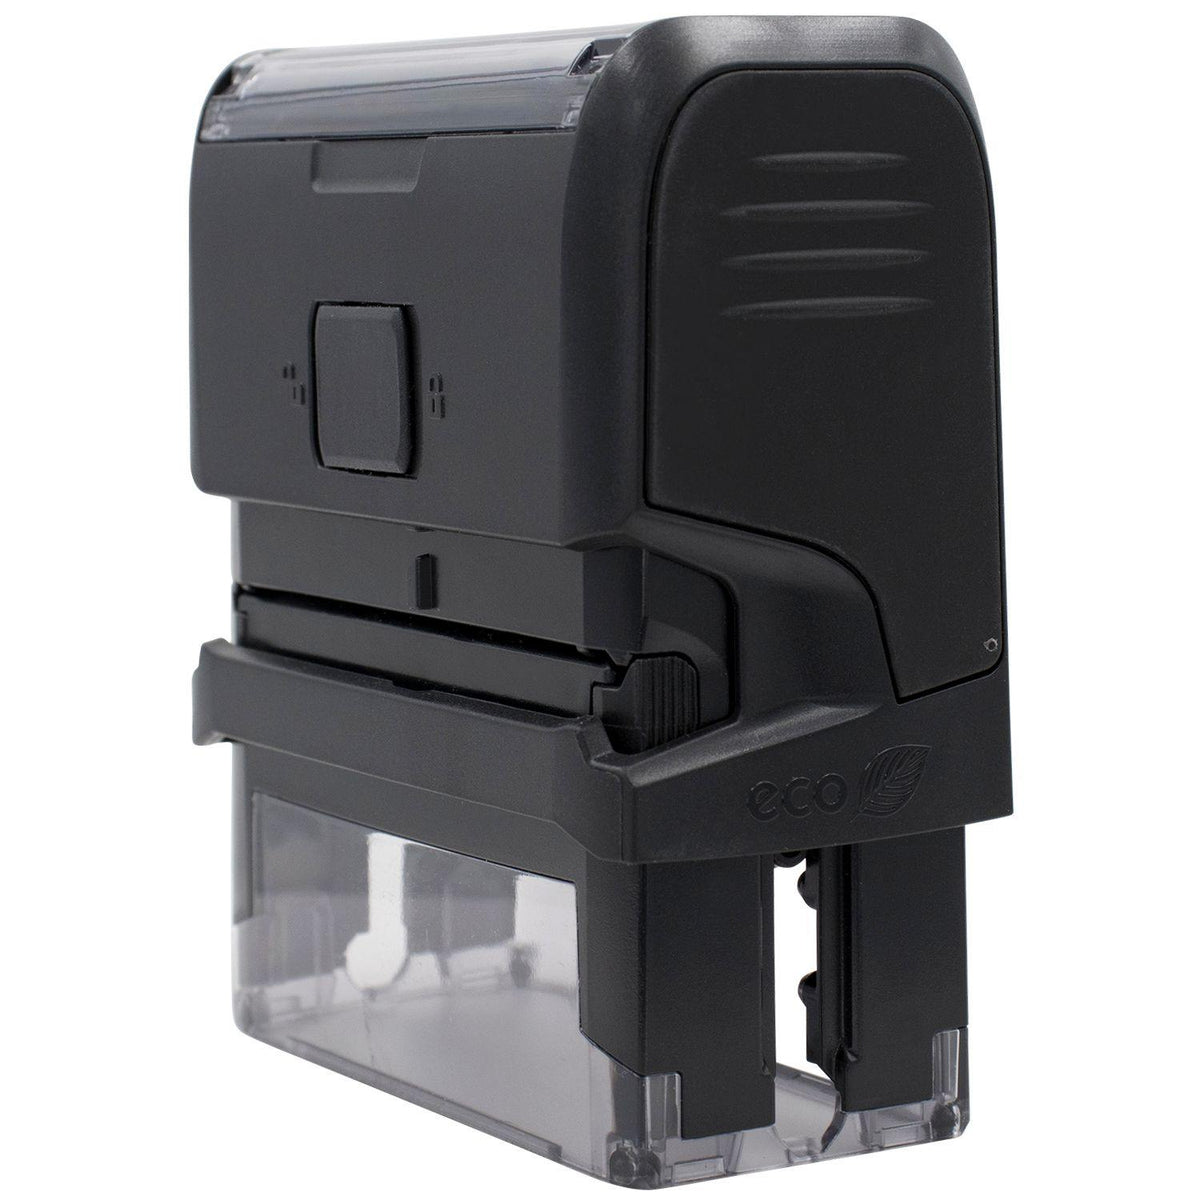 Large Self-Inking Faxed with Round Date Box Stamp - Engineer Seal Stamps - Brand_Trodat, Impression Size_Large, Stamp Type_Self-Inking Stamp, Type of Use_Business, Type of Use_Office, Type of Use_Professional